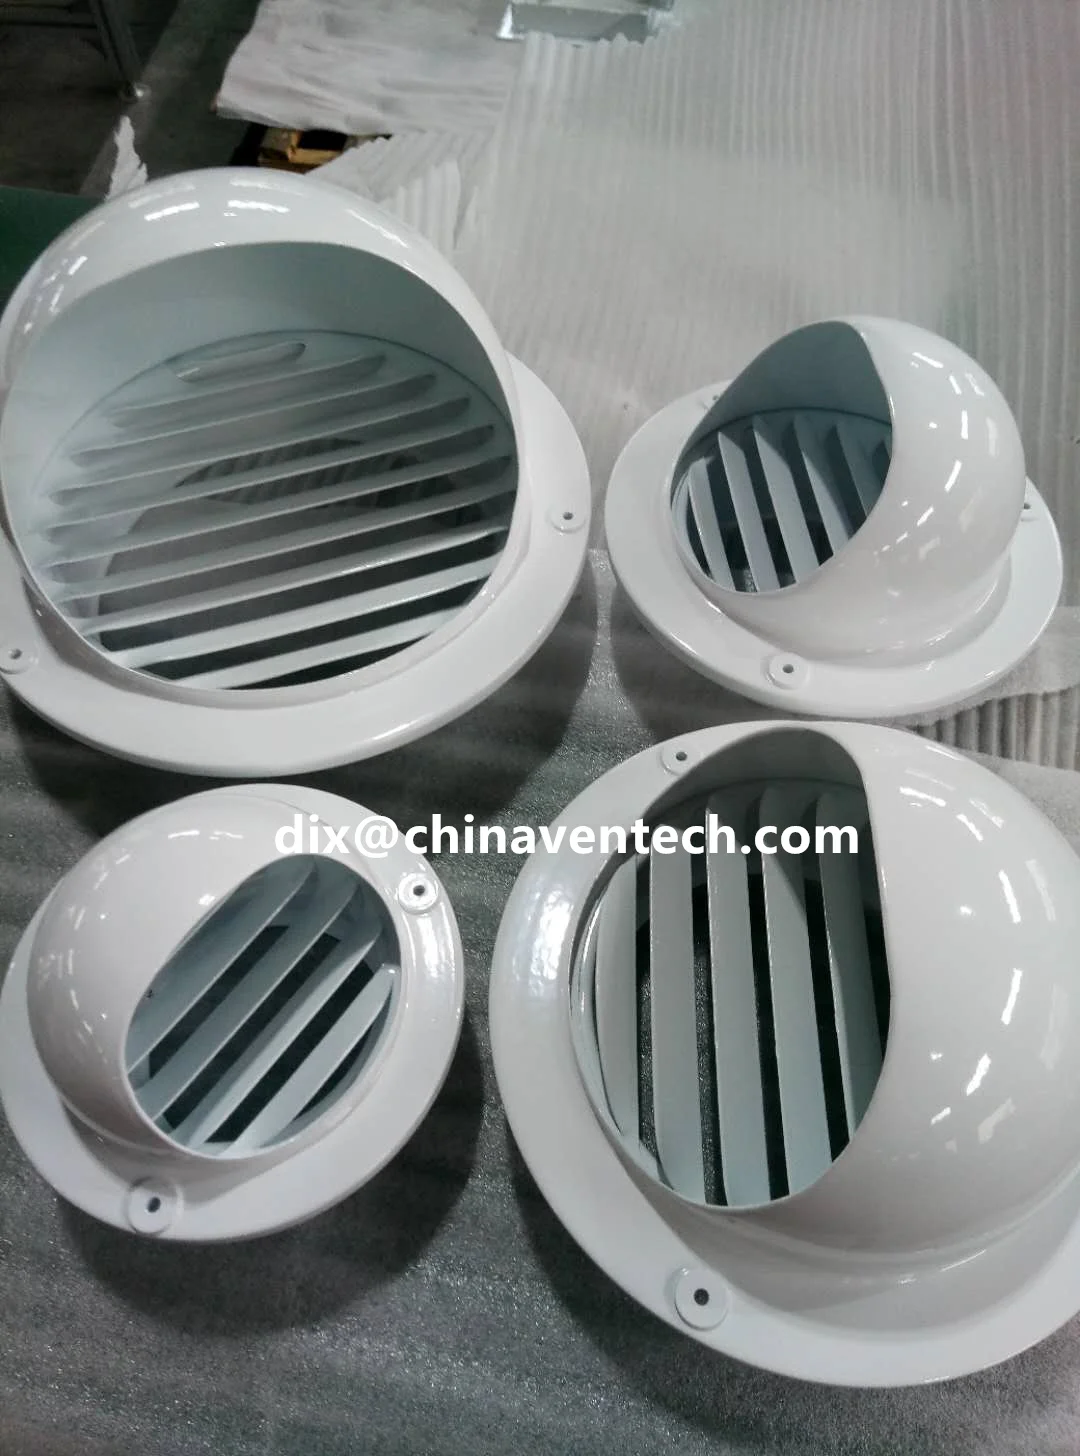 Very Hot Sell in Philippines Stainless Steel Ventilation Air Vent Cap Insect Screen Ball Weather louver